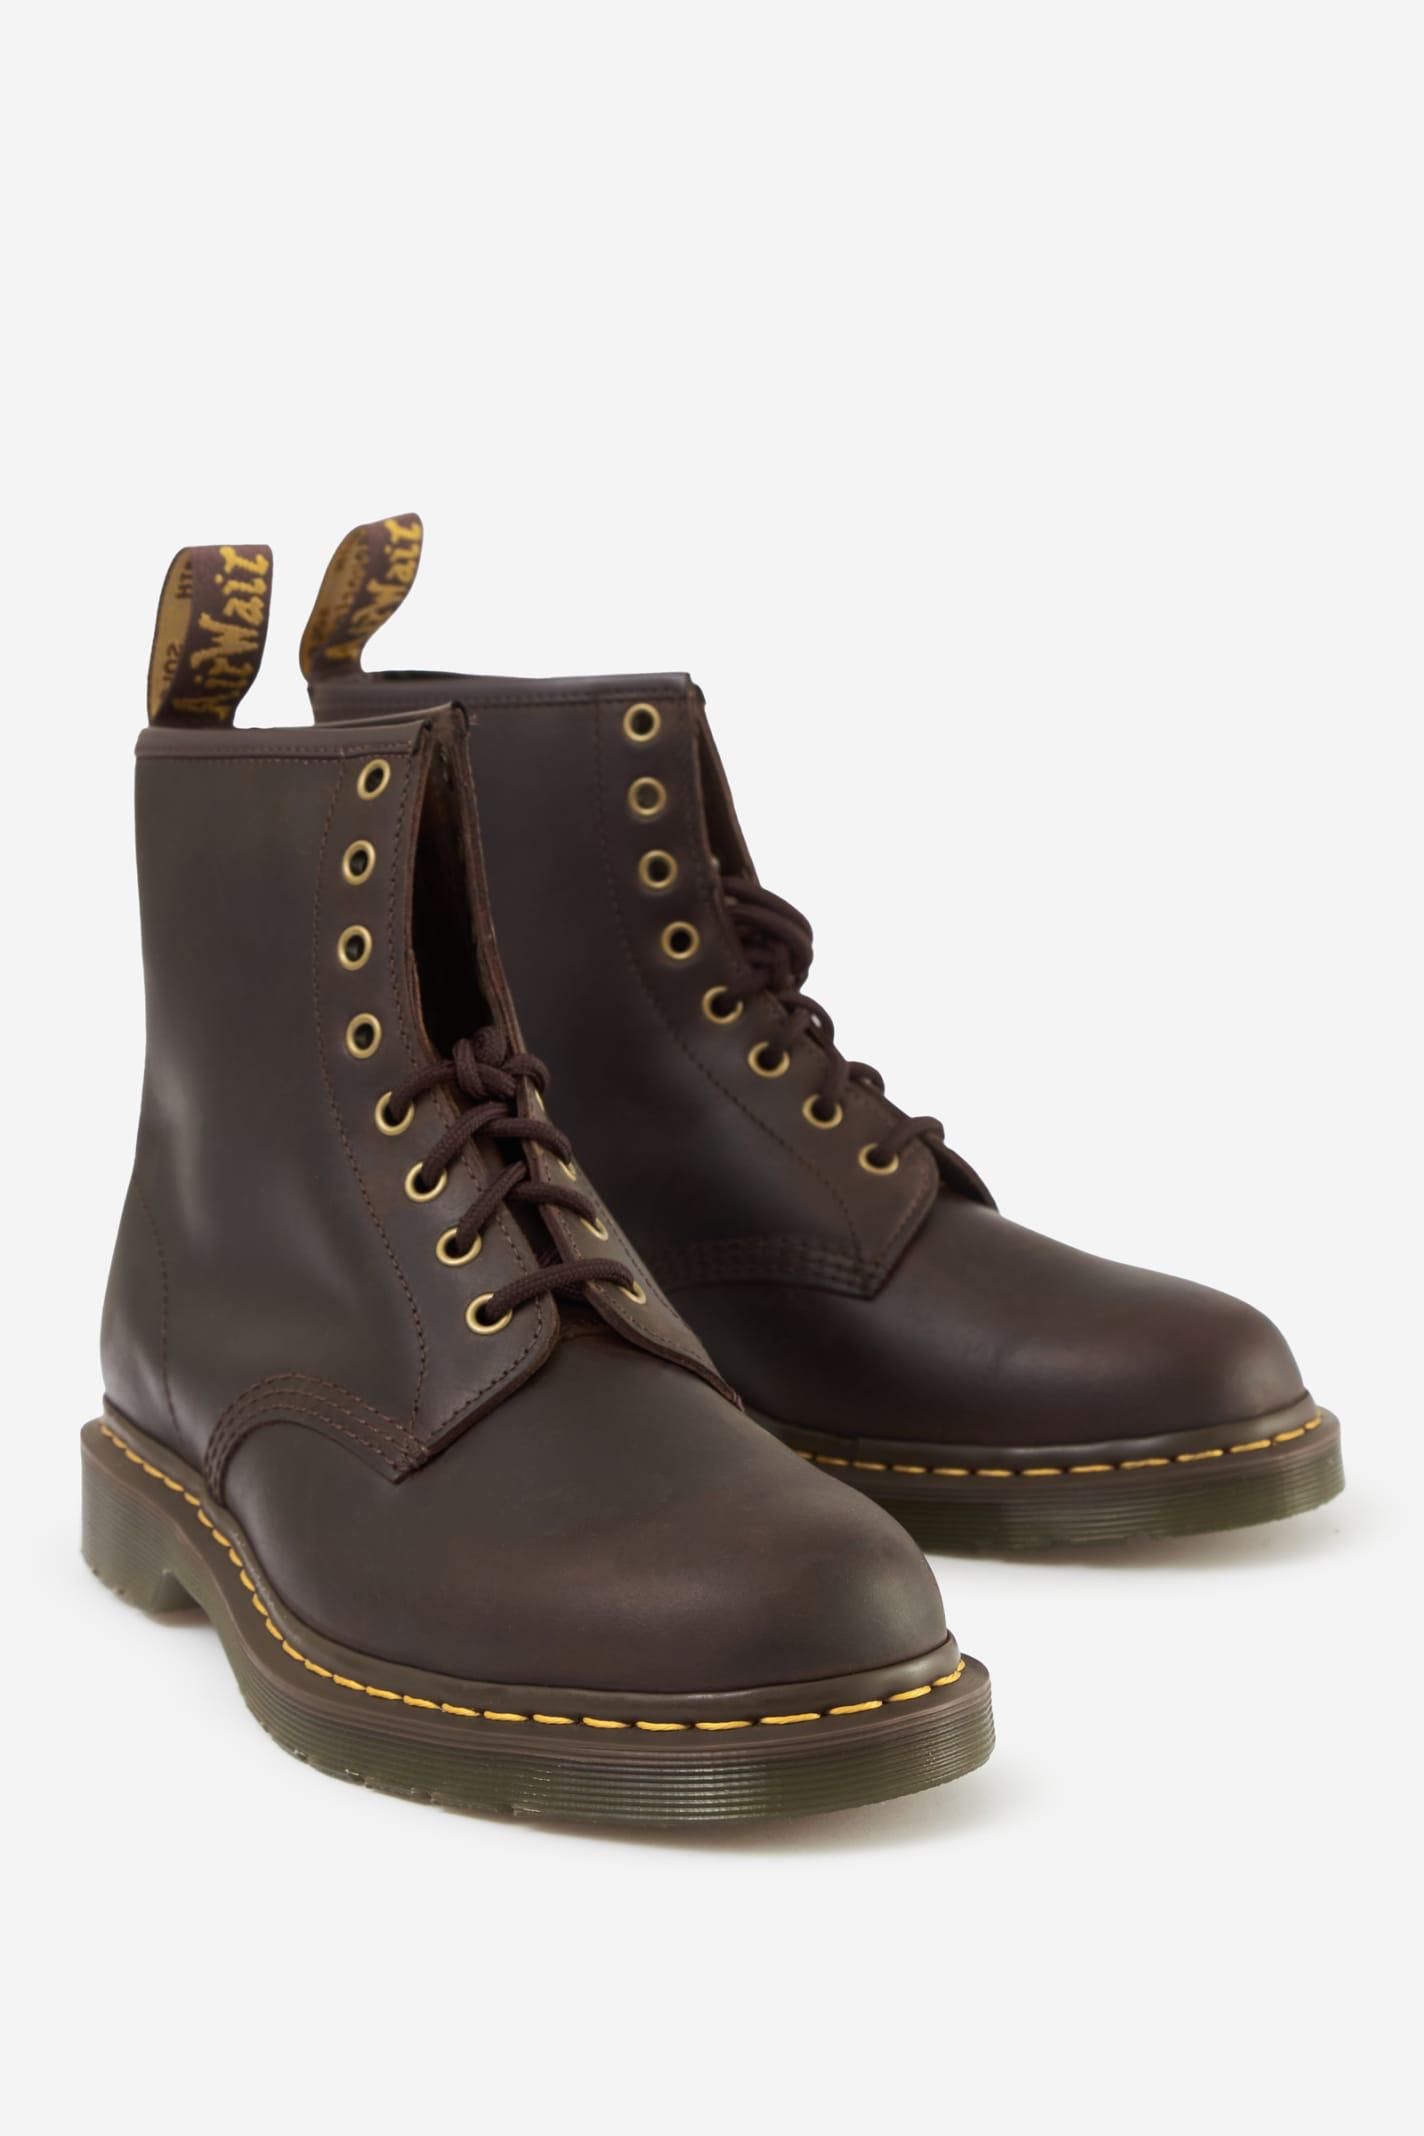 Dr. Martens 1460 Smooth Combat Boots in Brown | Lyst